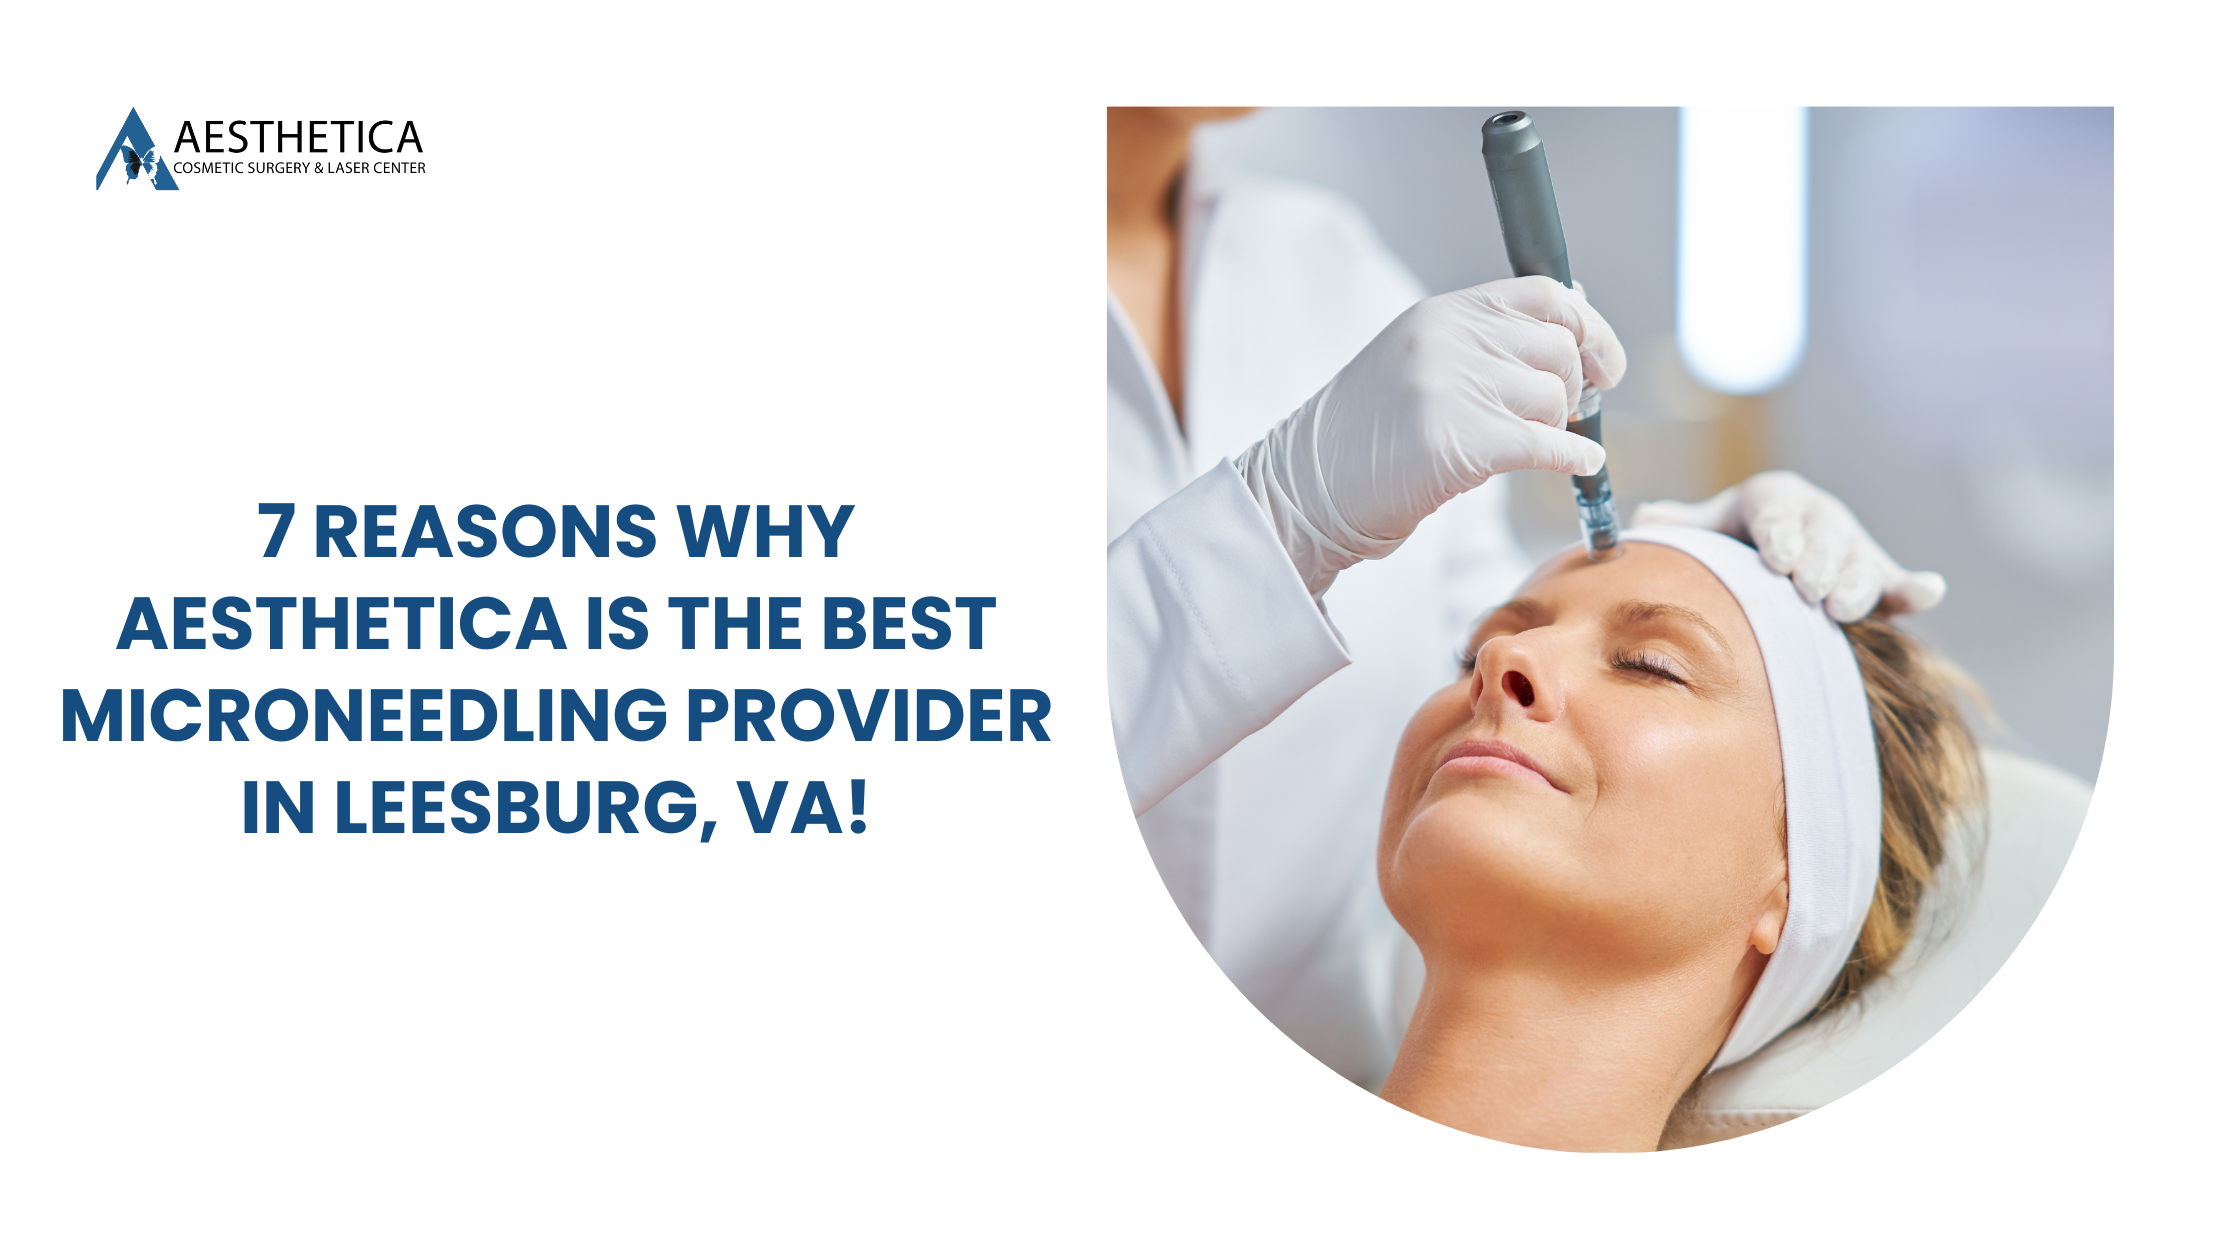 Find Your Glow: 7 Reasons Why Aesthetica Is the Best Microneedling Provider in Leesburg, VA!